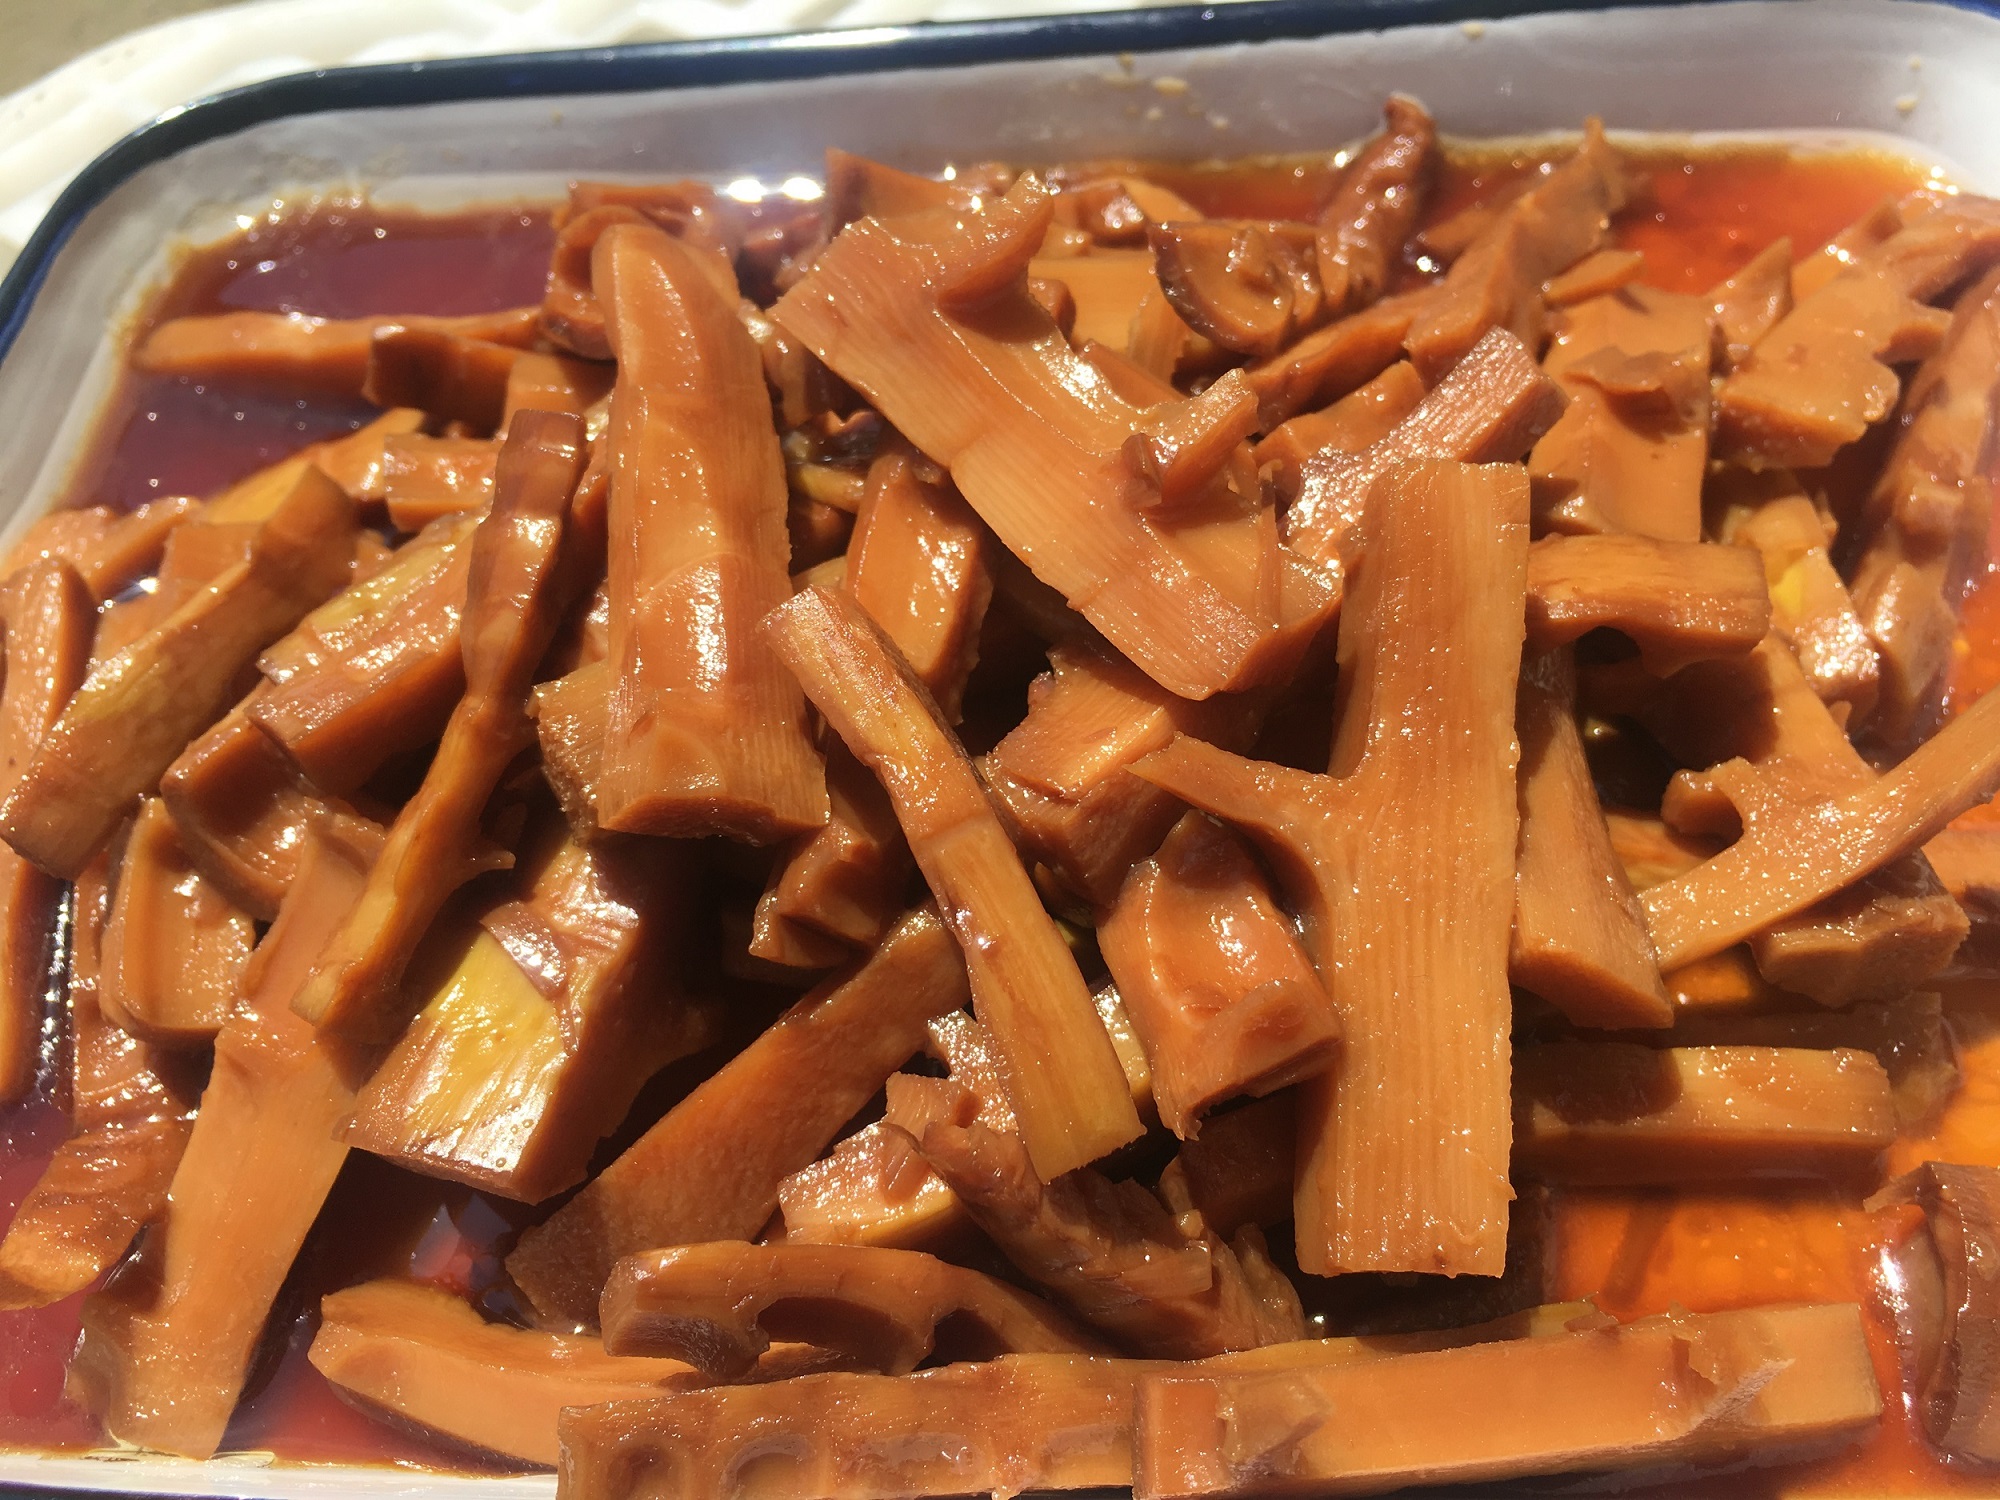 BRAISED BAMBOO SHOOTS